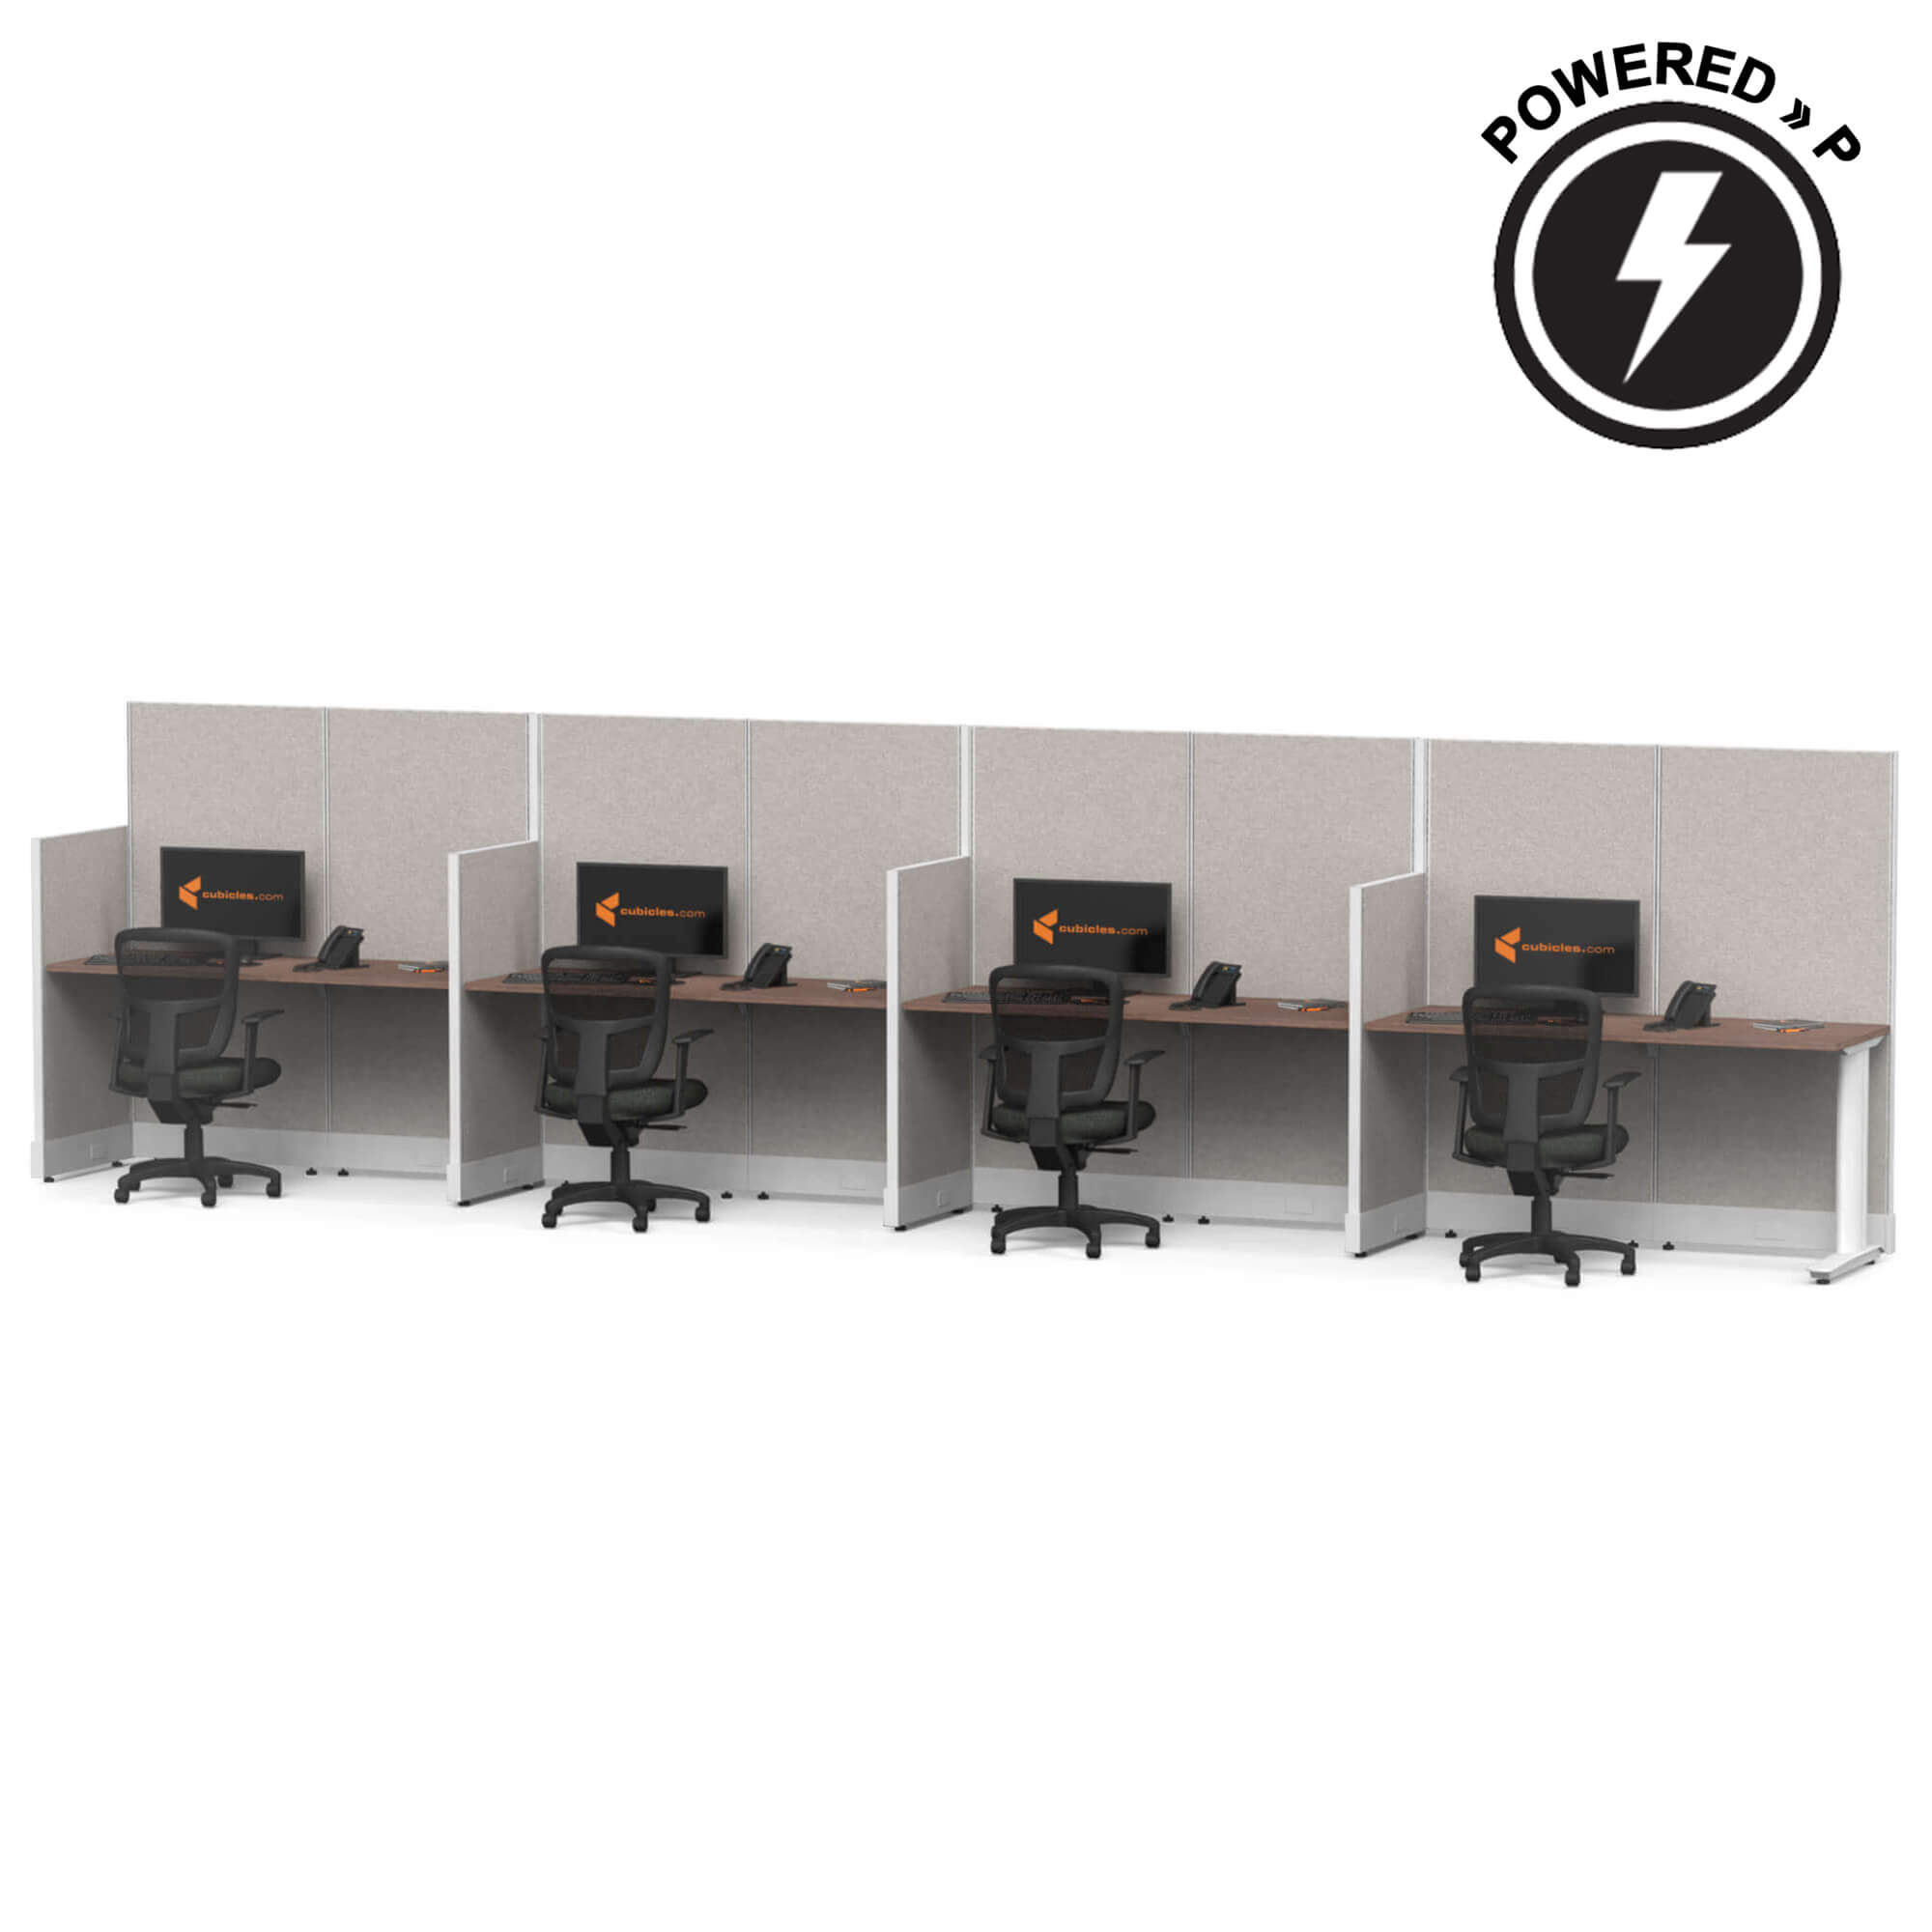 Cubicle desk straight workstation 4pack inline powered sign 1 2